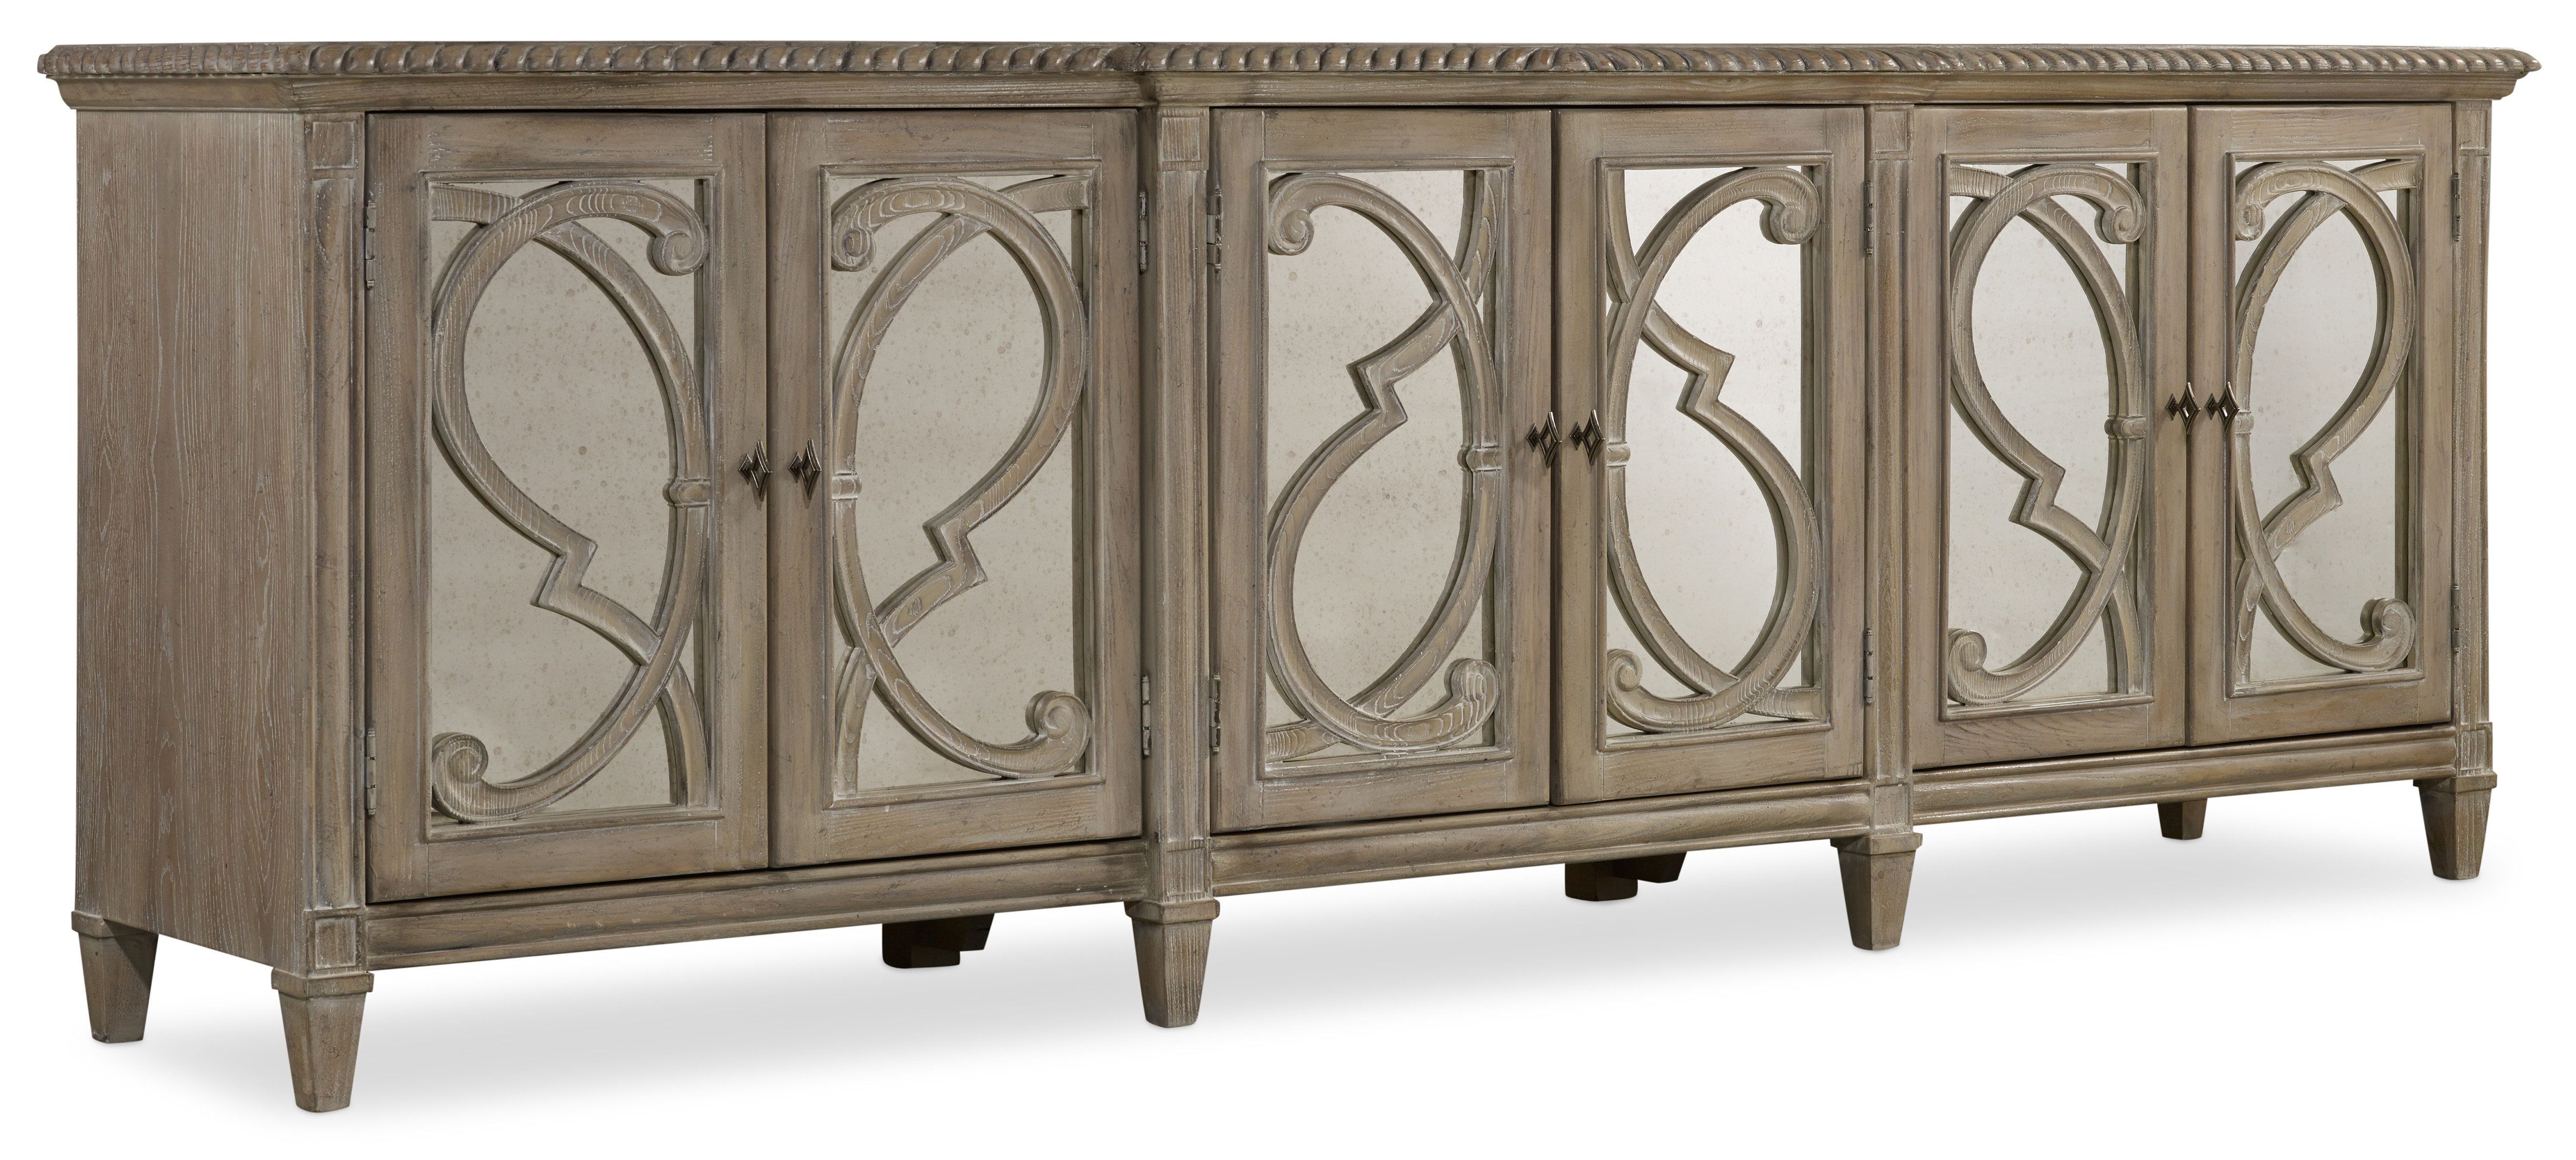 Solana Sideboard Pertaining To Newest Solana Sideboards (View 1 of 20)